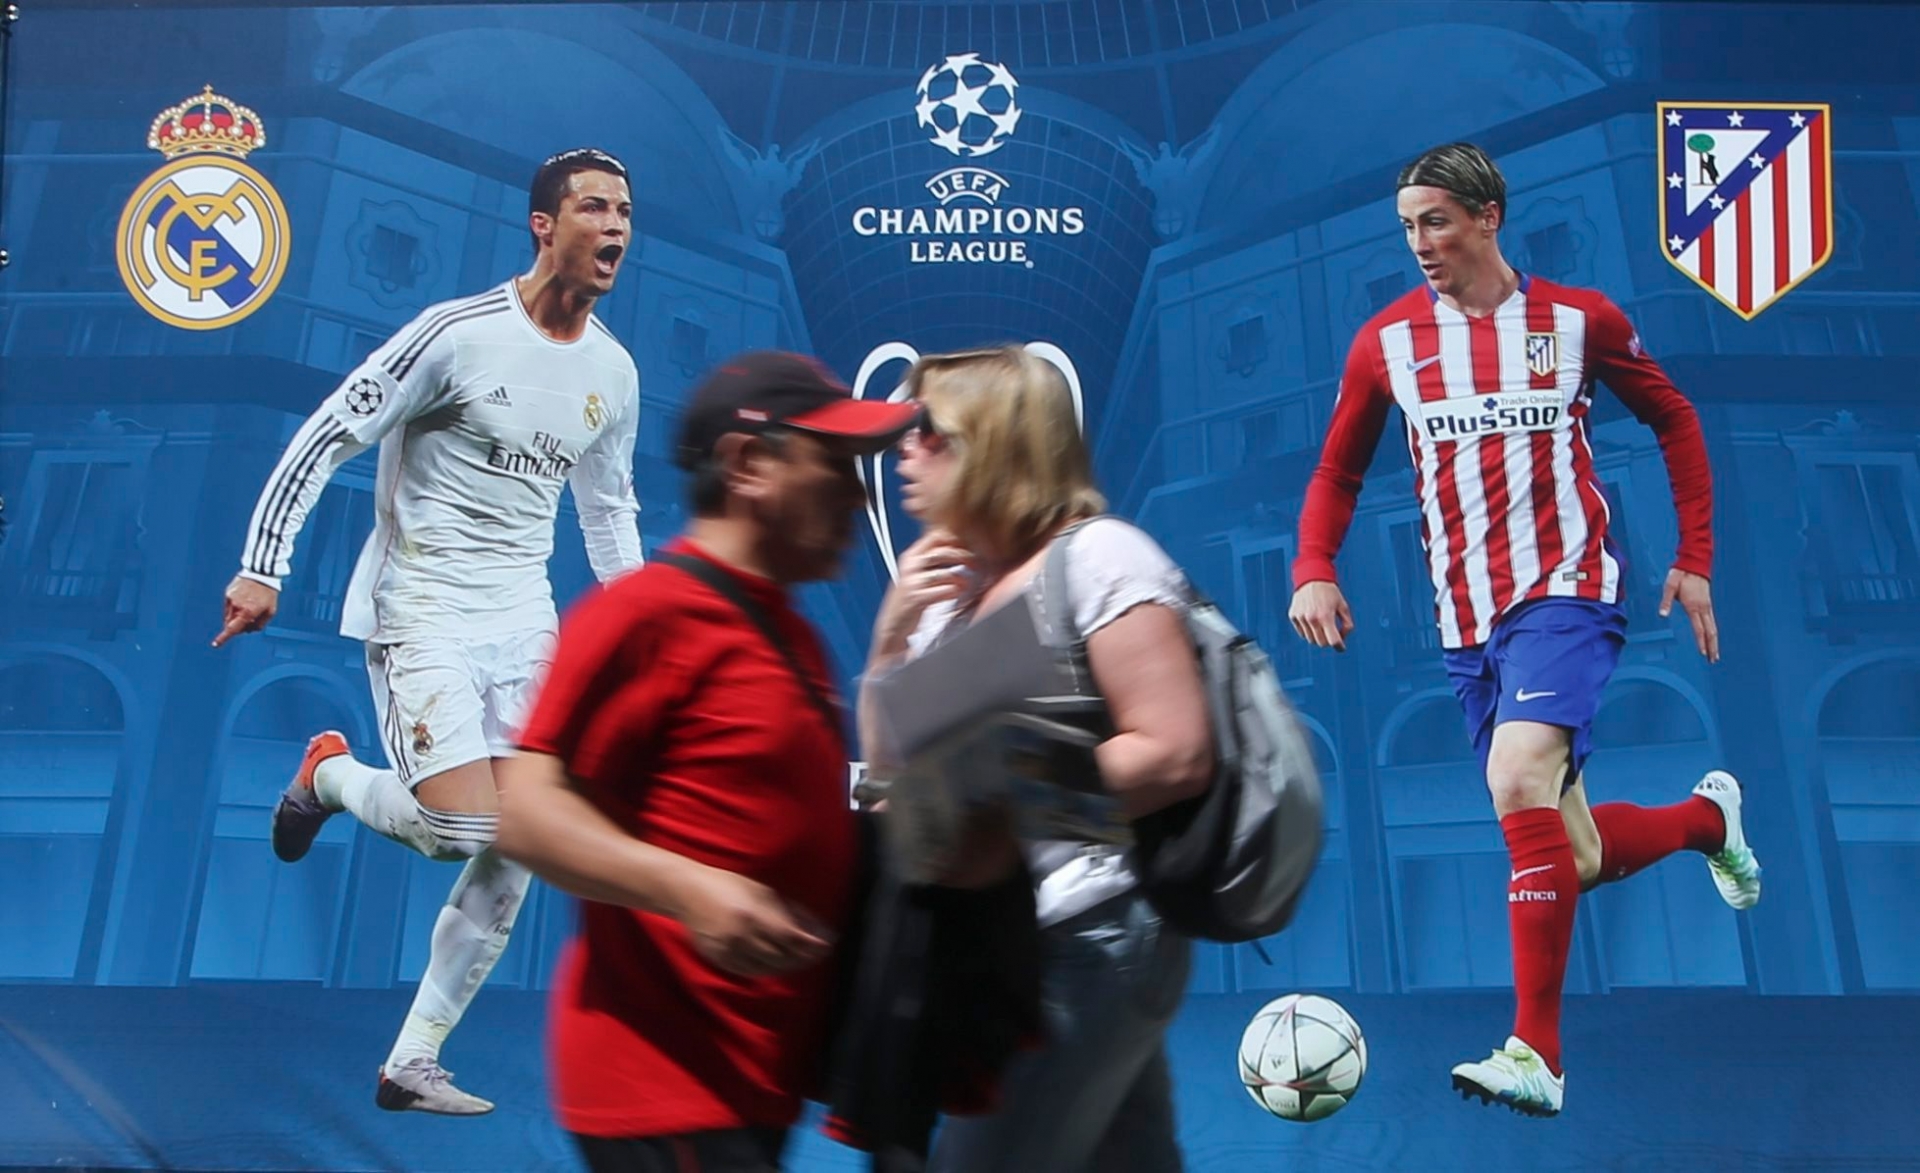 People walk by a billboard portraying Real Madrid's Cristiano Ronald, left, and Athletico Madrid's Fernando Torres, at the Champions Festival event area, in Milan, Italy, Thursday, May 26, 2016. The Champions League soccer final between Real Madrid and Atletico Madrid will be held at the San Siro stadium on Saturday, May 28, 2016. (AP Photo/Luca Bruno) Italy Soccer Champions League Final